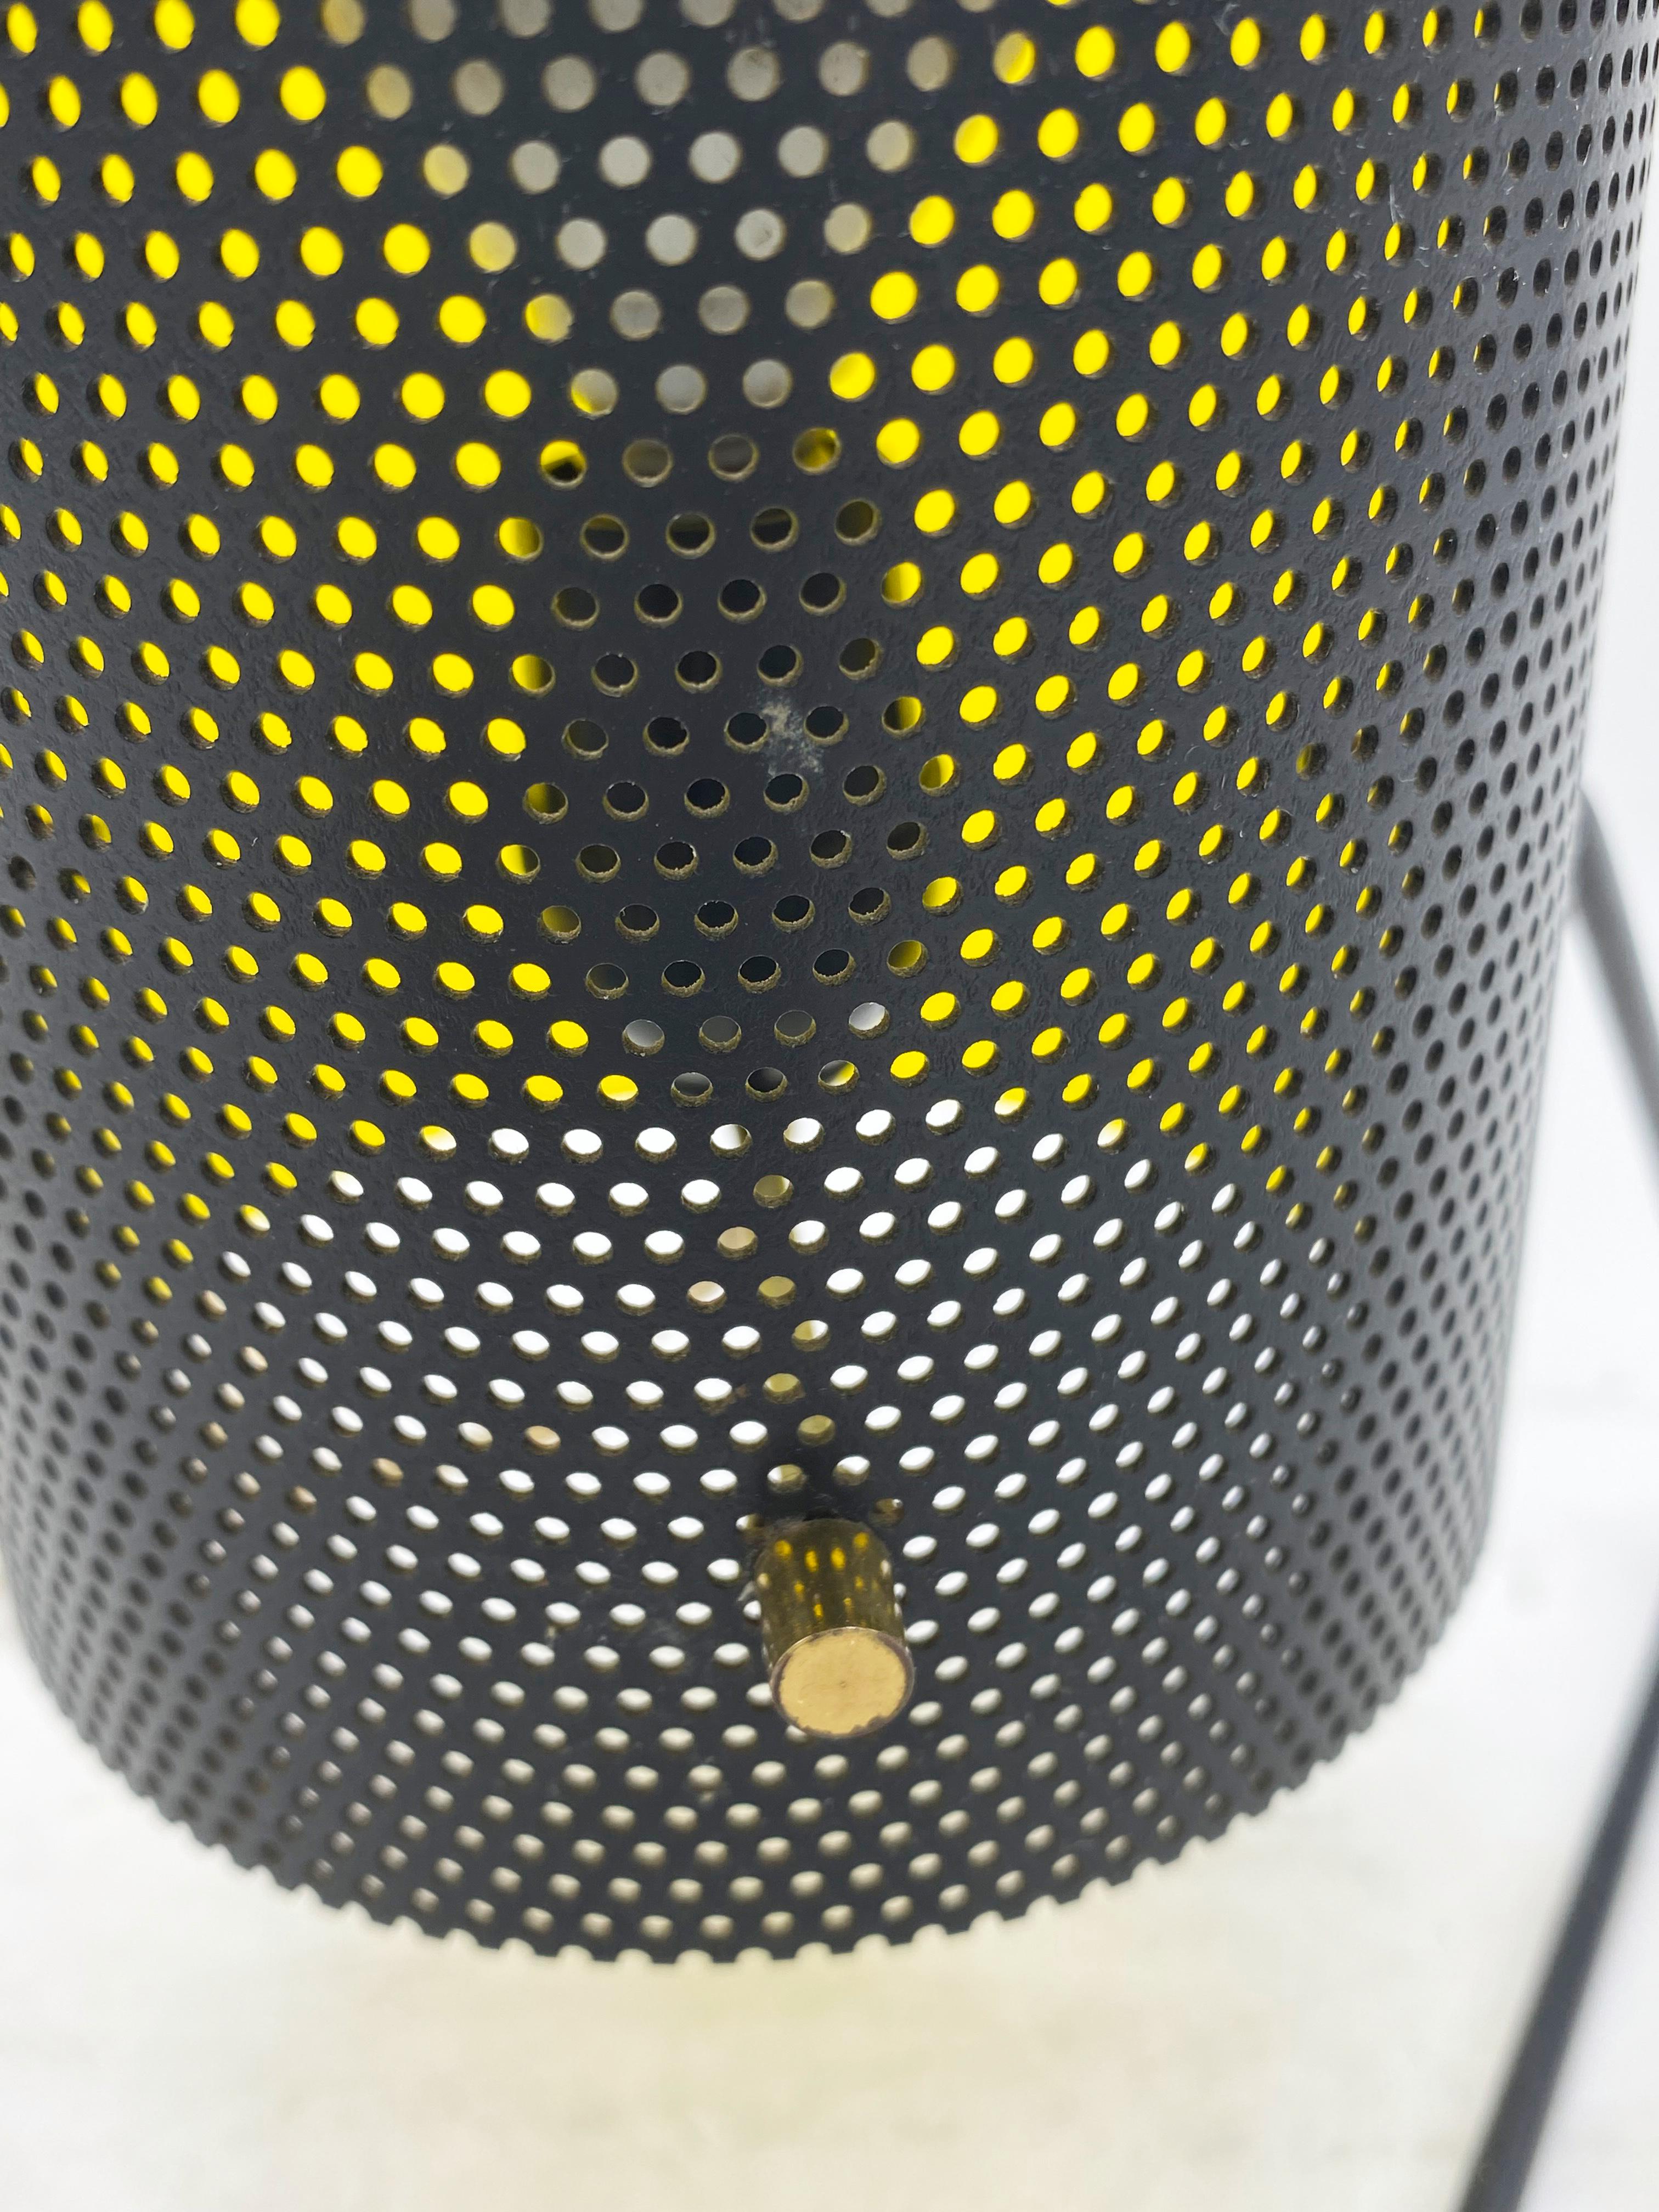 Stilux Milano Perforated Metal Table Lamp, Italy 1960s For Sale 2